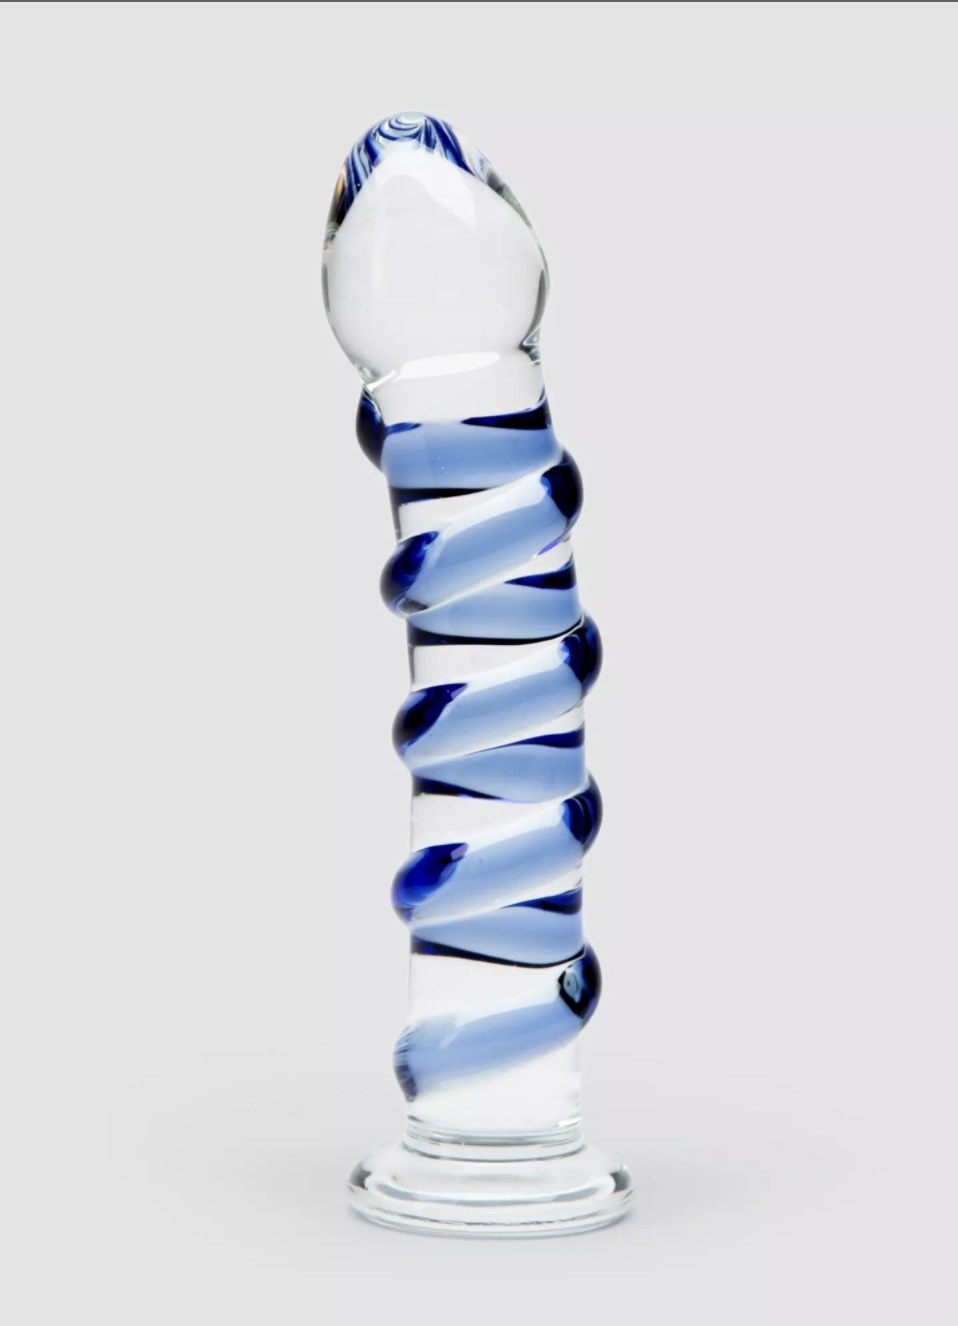 The glass dildo with blue twist ribbing wrapped up the shaft